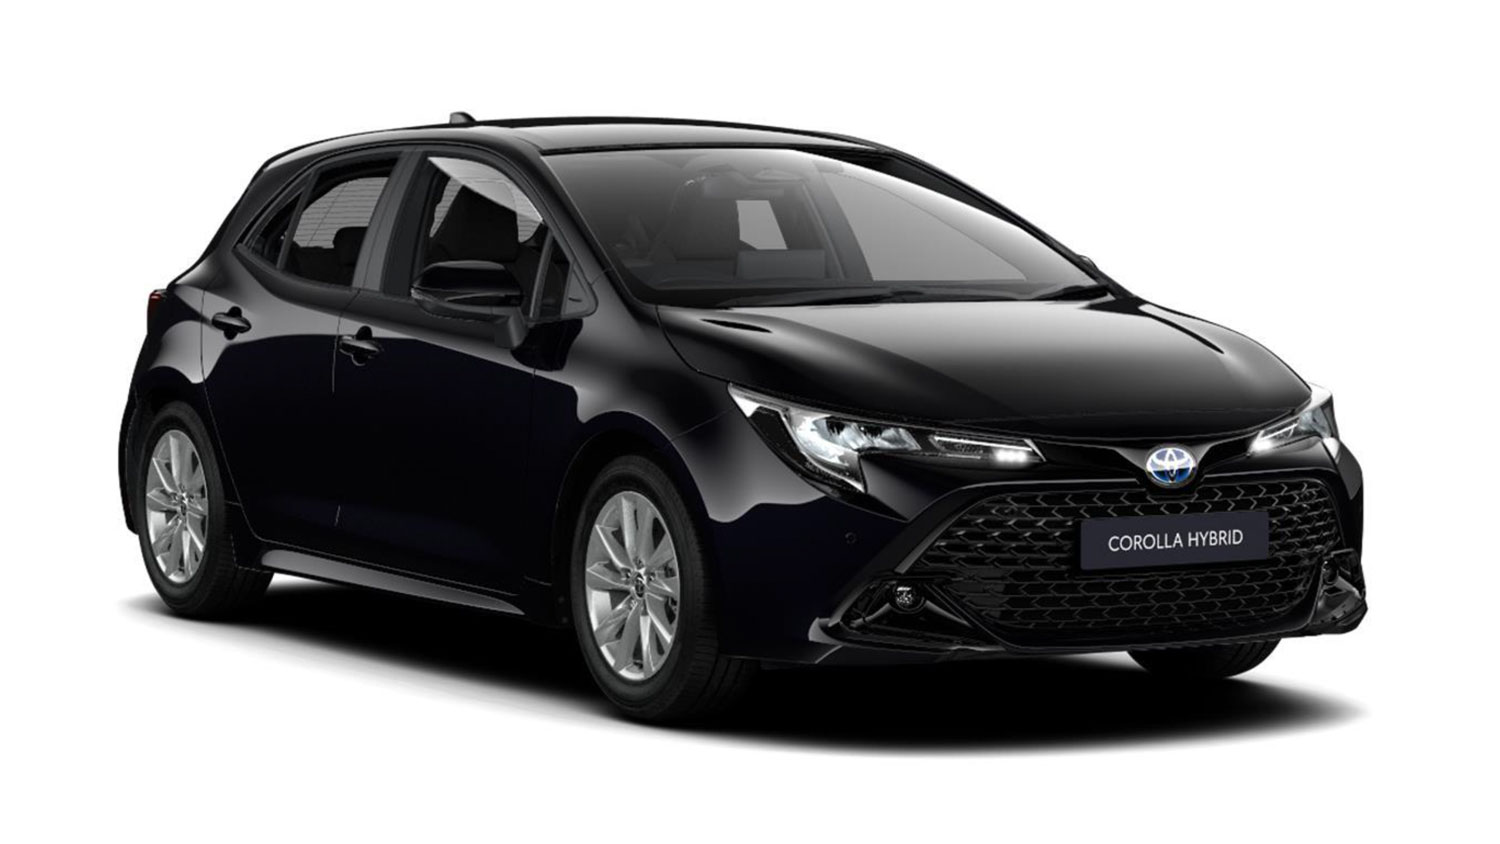 Toyota Corolla GR Sport review: now with fifth-gen hybrid